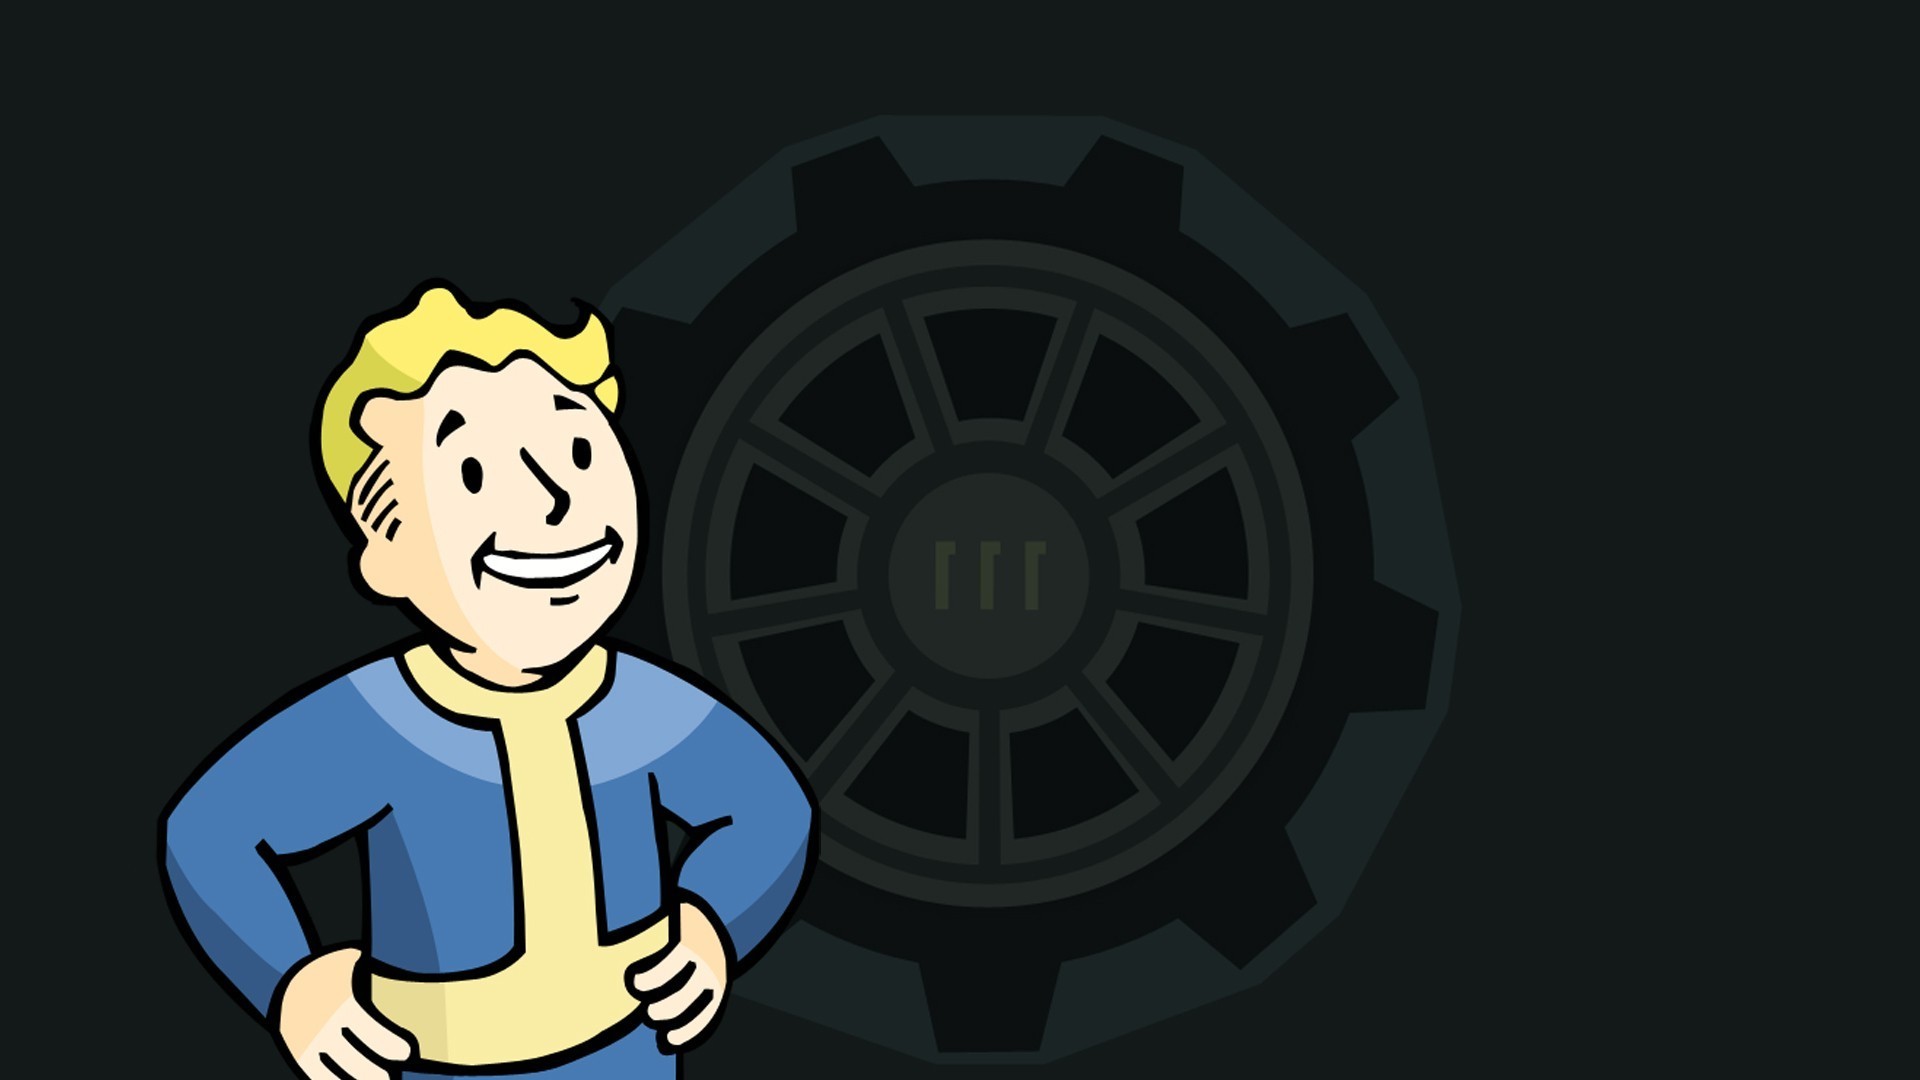 Fallout 4, Video Games, Vault 111, Vault Boy, Fallout, Bethesda Softworks,  Apocalyptic Wallpapers HD / Desktop and Mobile Backgrounds